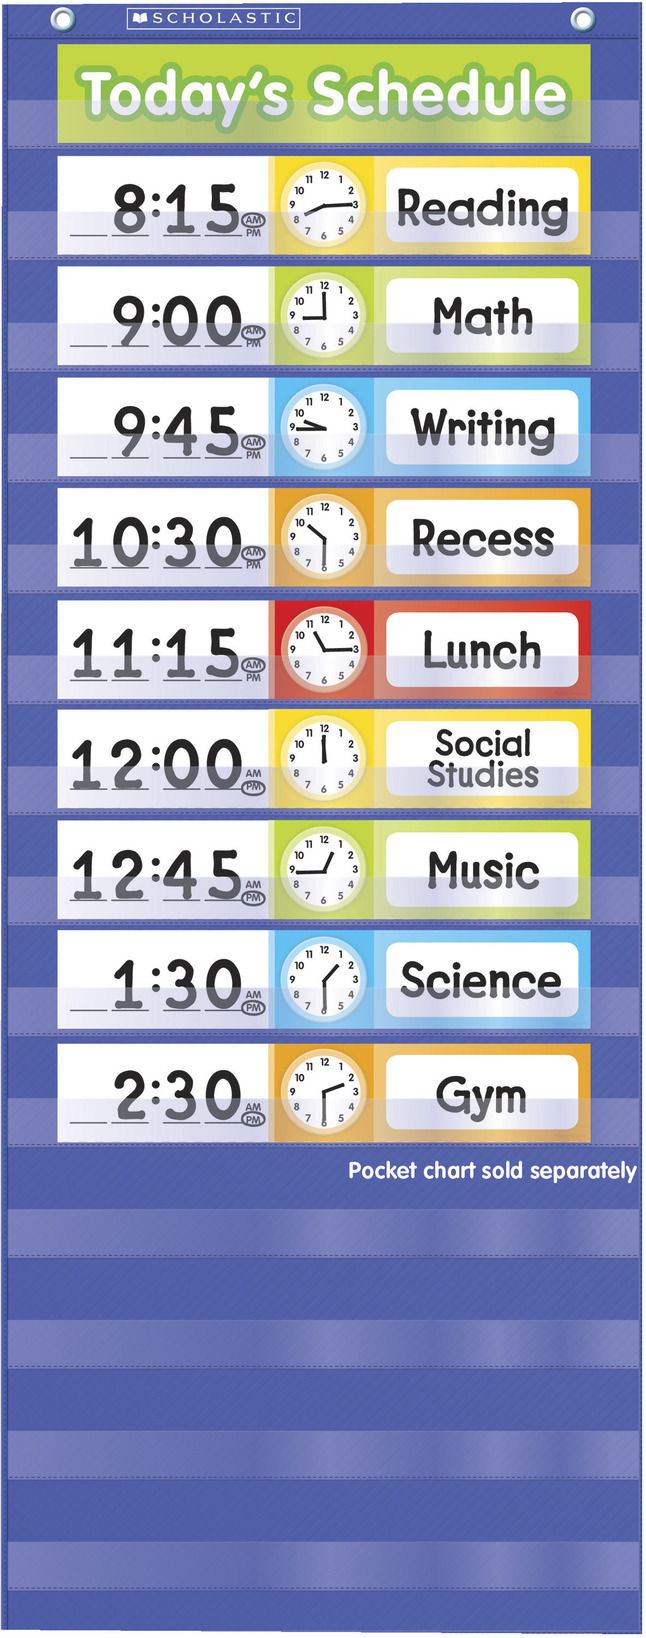 Black Magnetic Pocket Chart with 10 Dry Erase Cards for Standards,Daily Schedule,Activities,Class demonstrations